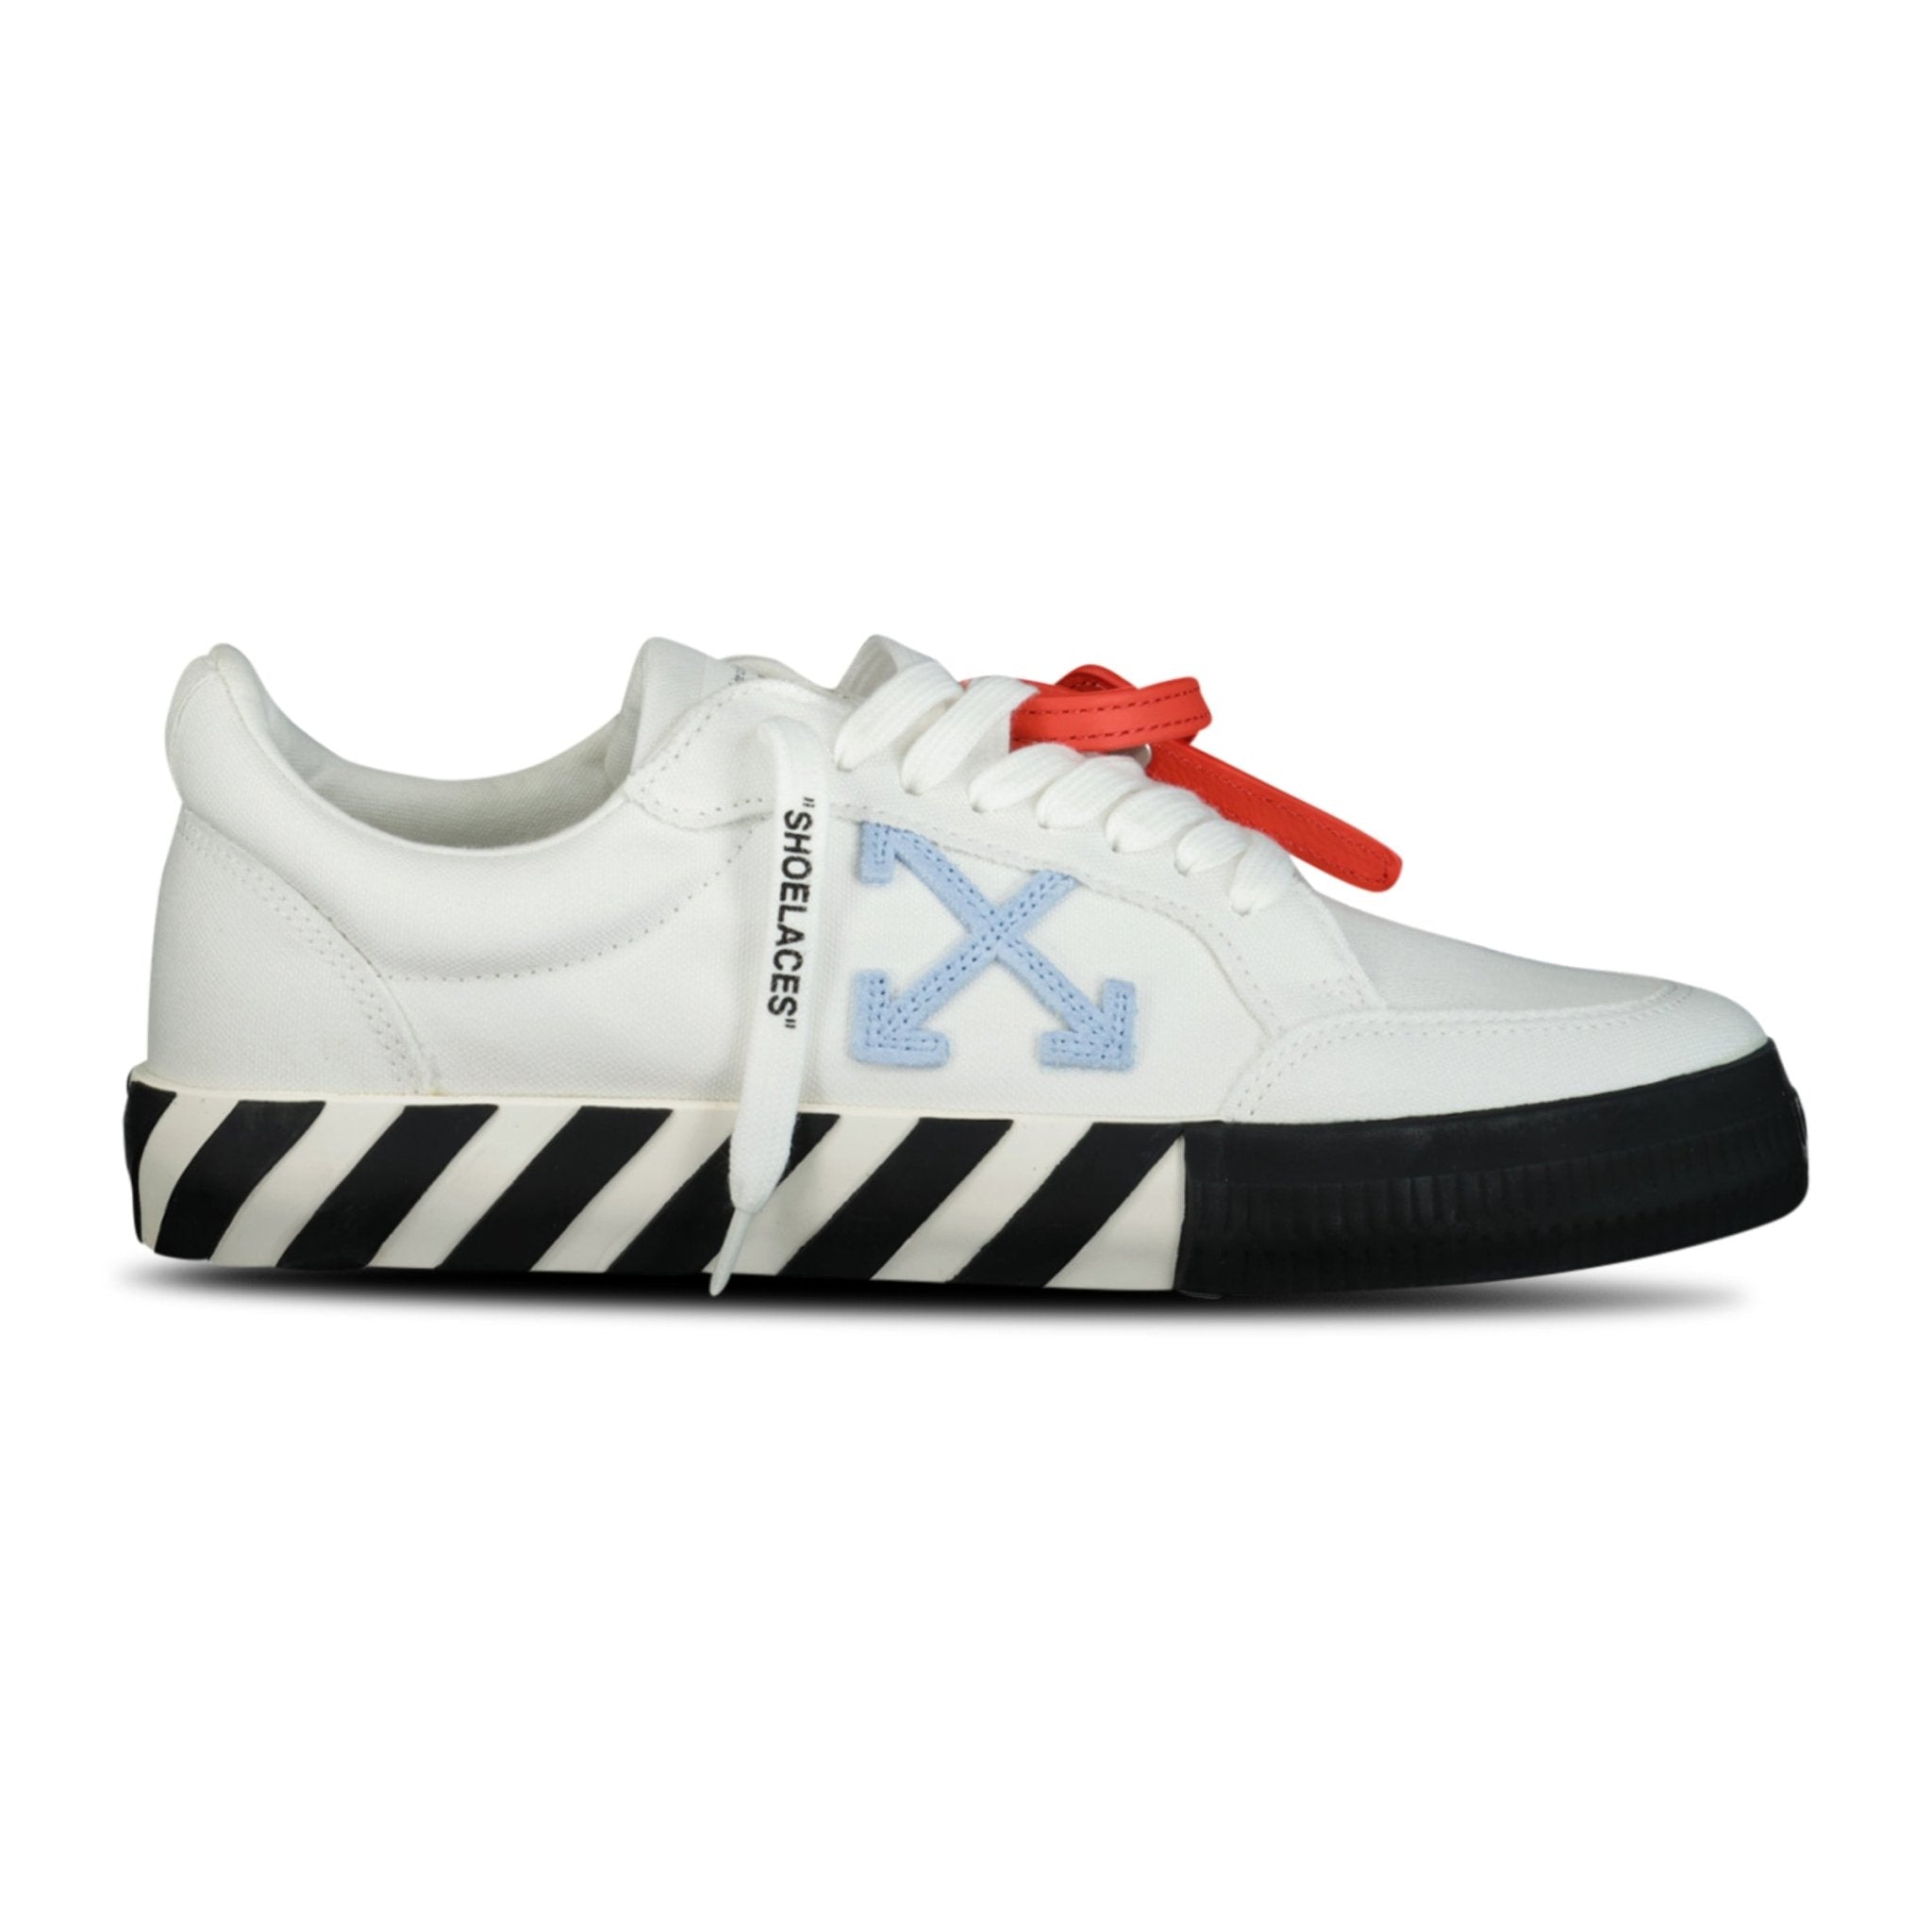 Off-White Vulcanized Low Top Trainers White & Light Blue